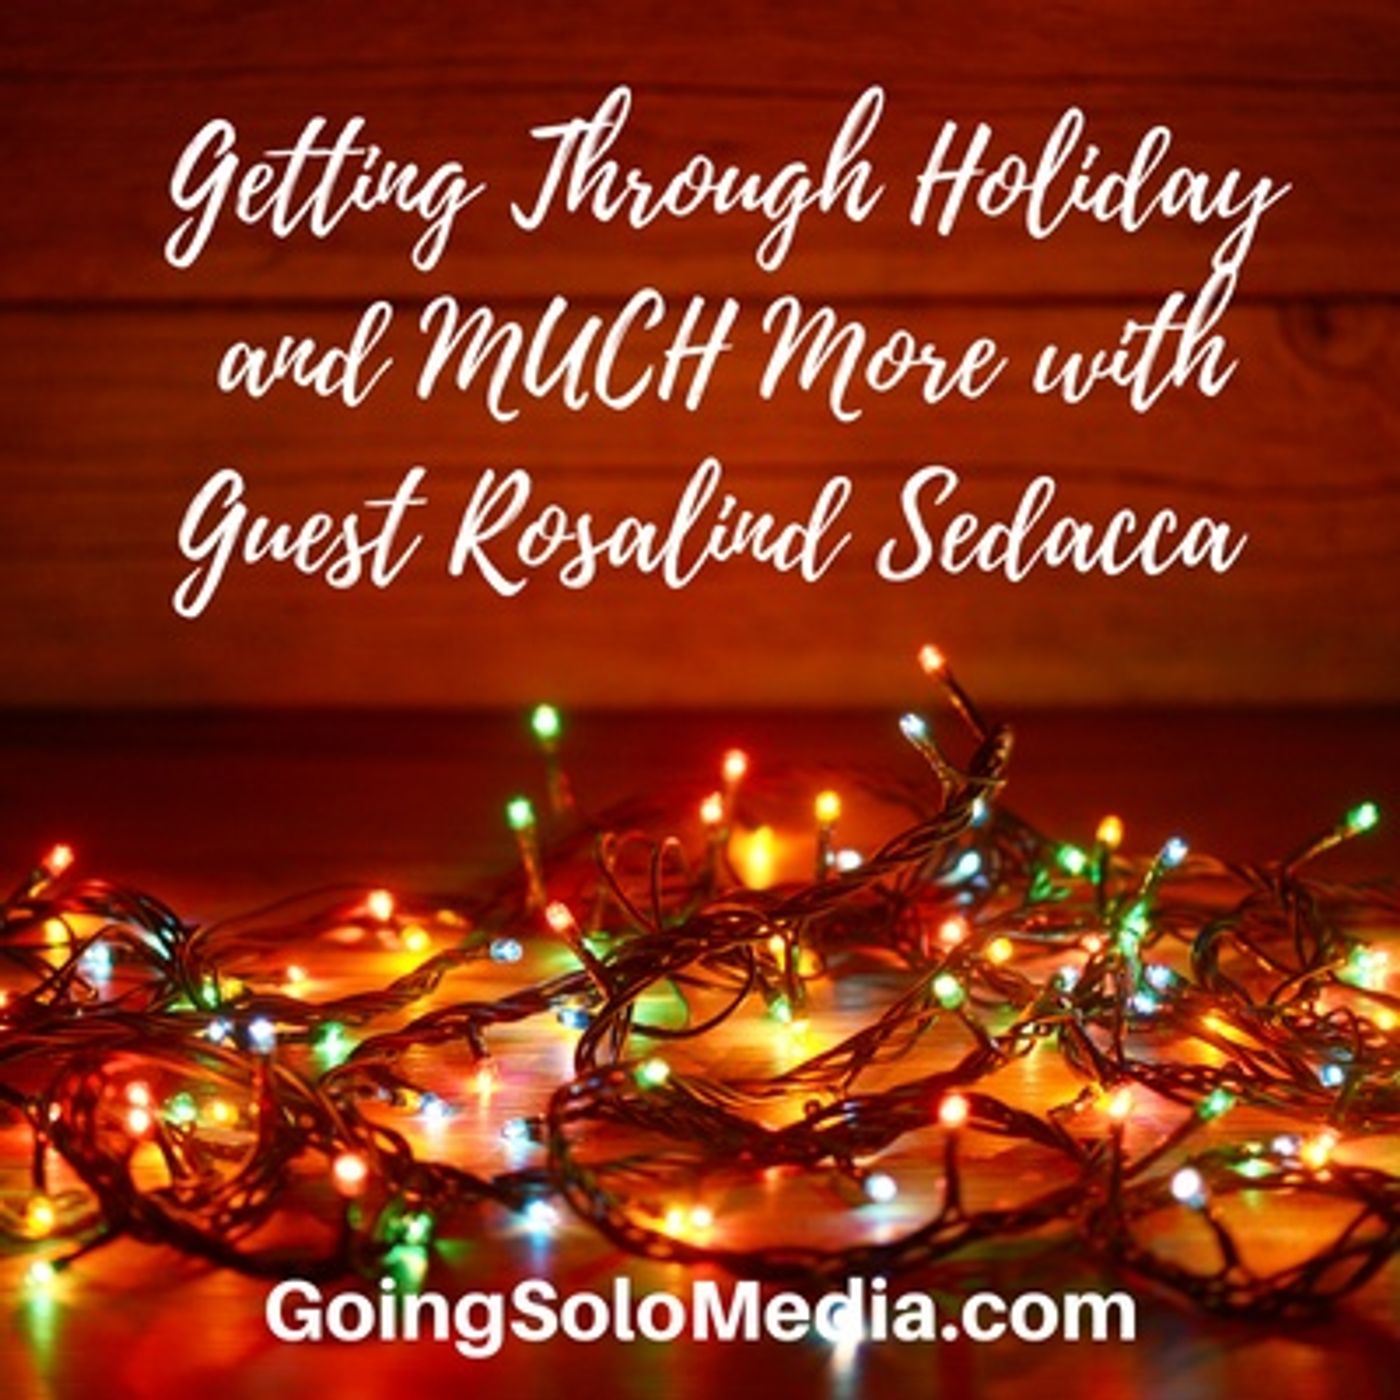 Getting Through Holiday and MUCH More with Guest Rosalind Sedacca